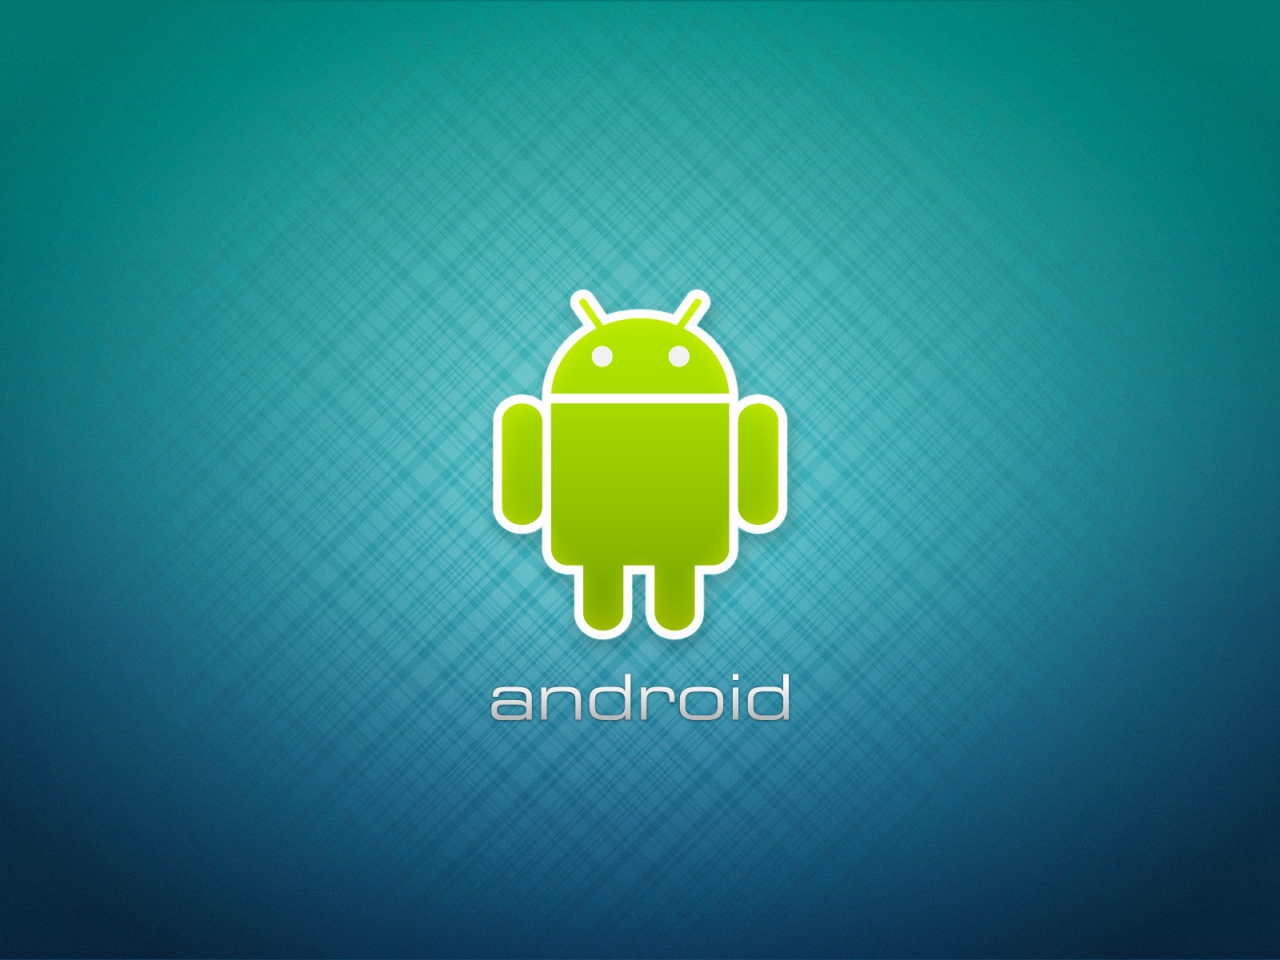 Just Android Logo for 1280 x 960 resolution